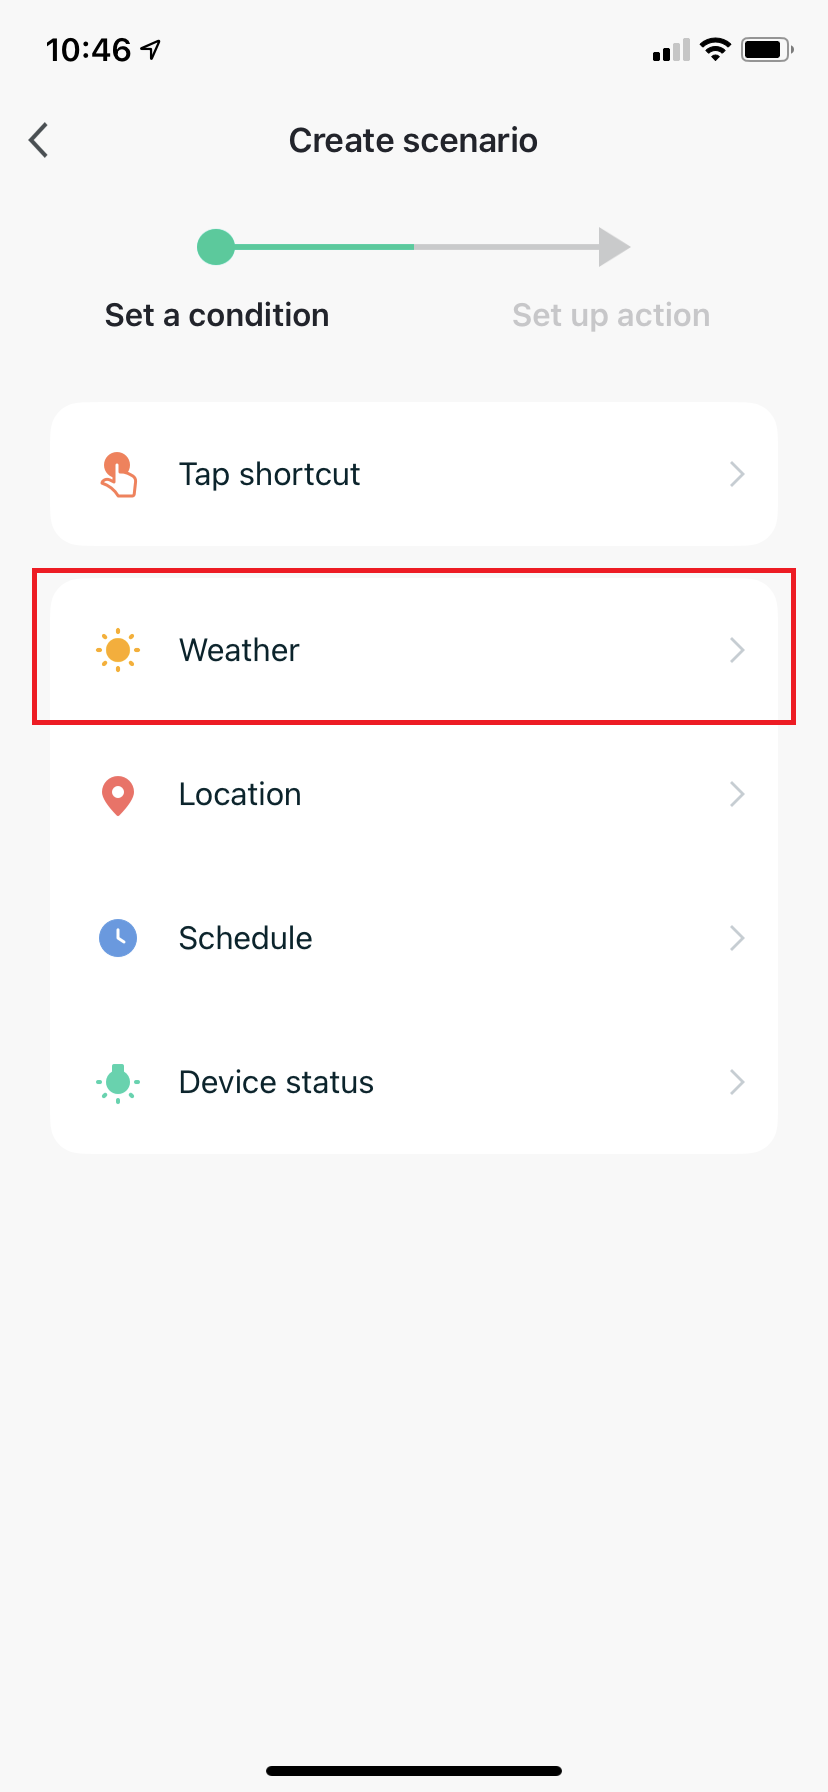 Select conditions for your automatic smart scenario